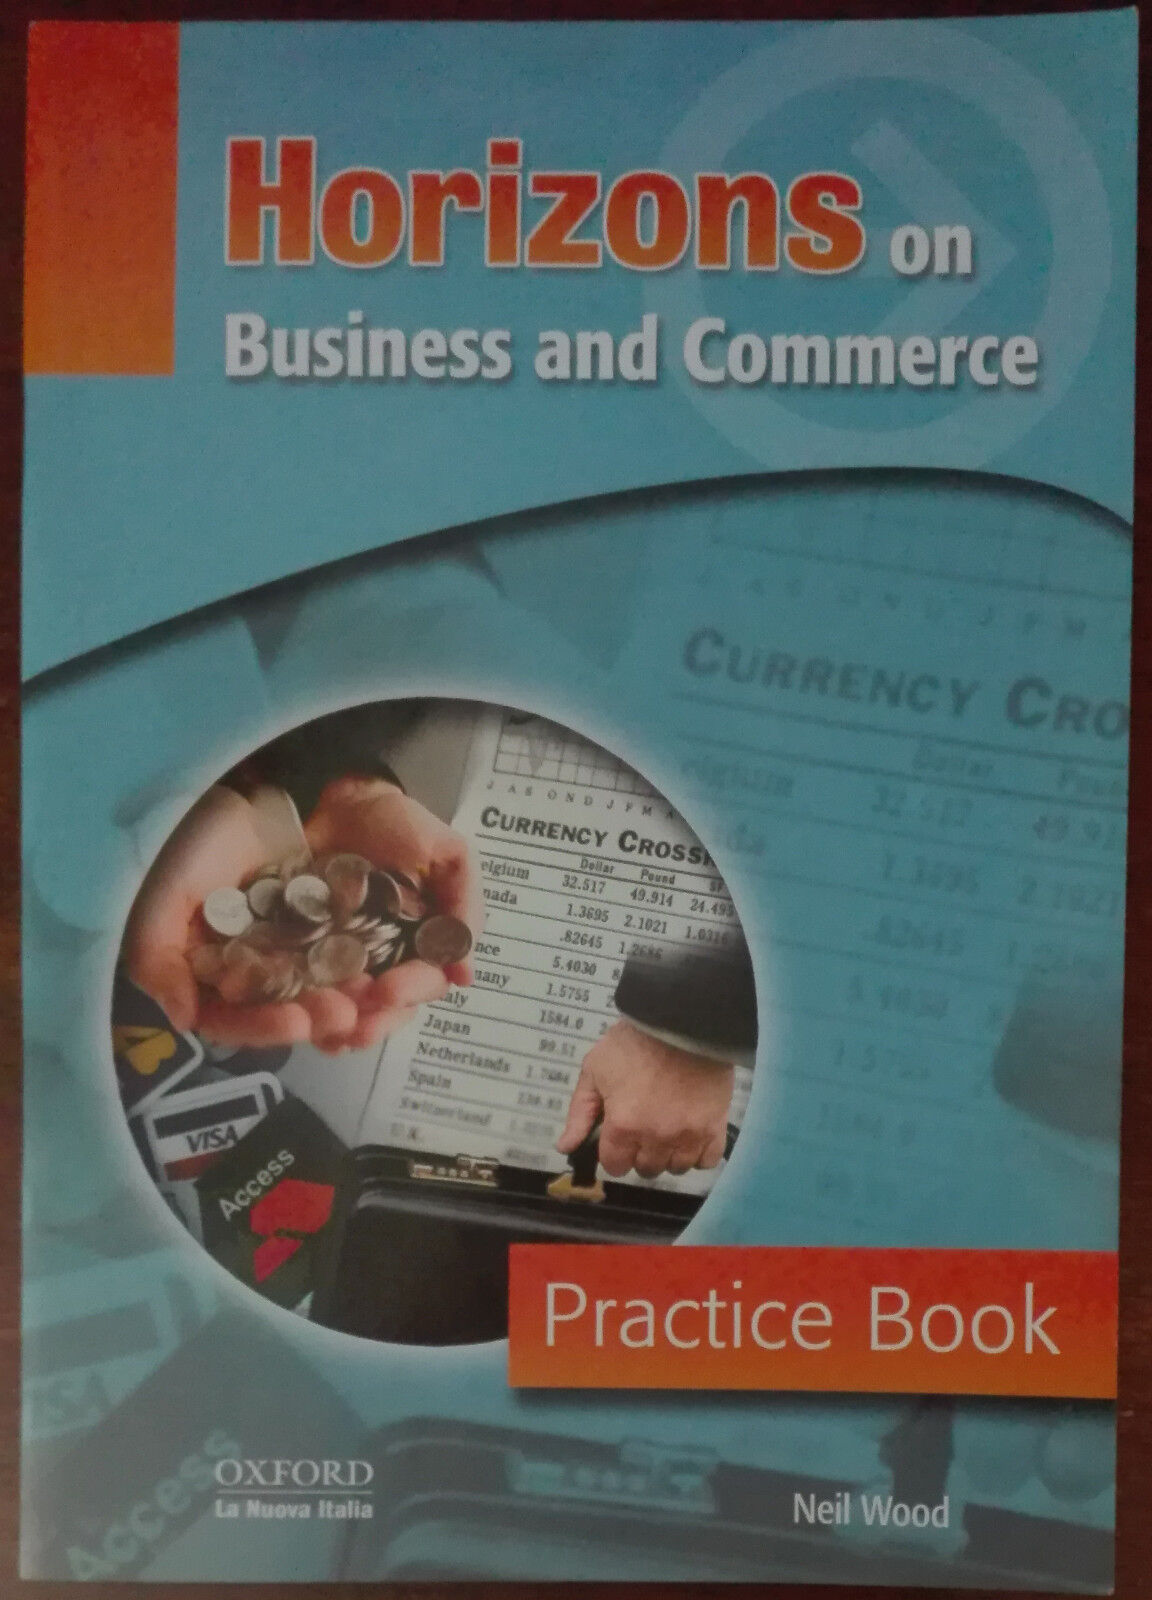 Horizons on business and commerce - Neil Wood - Oxford,2004 - A